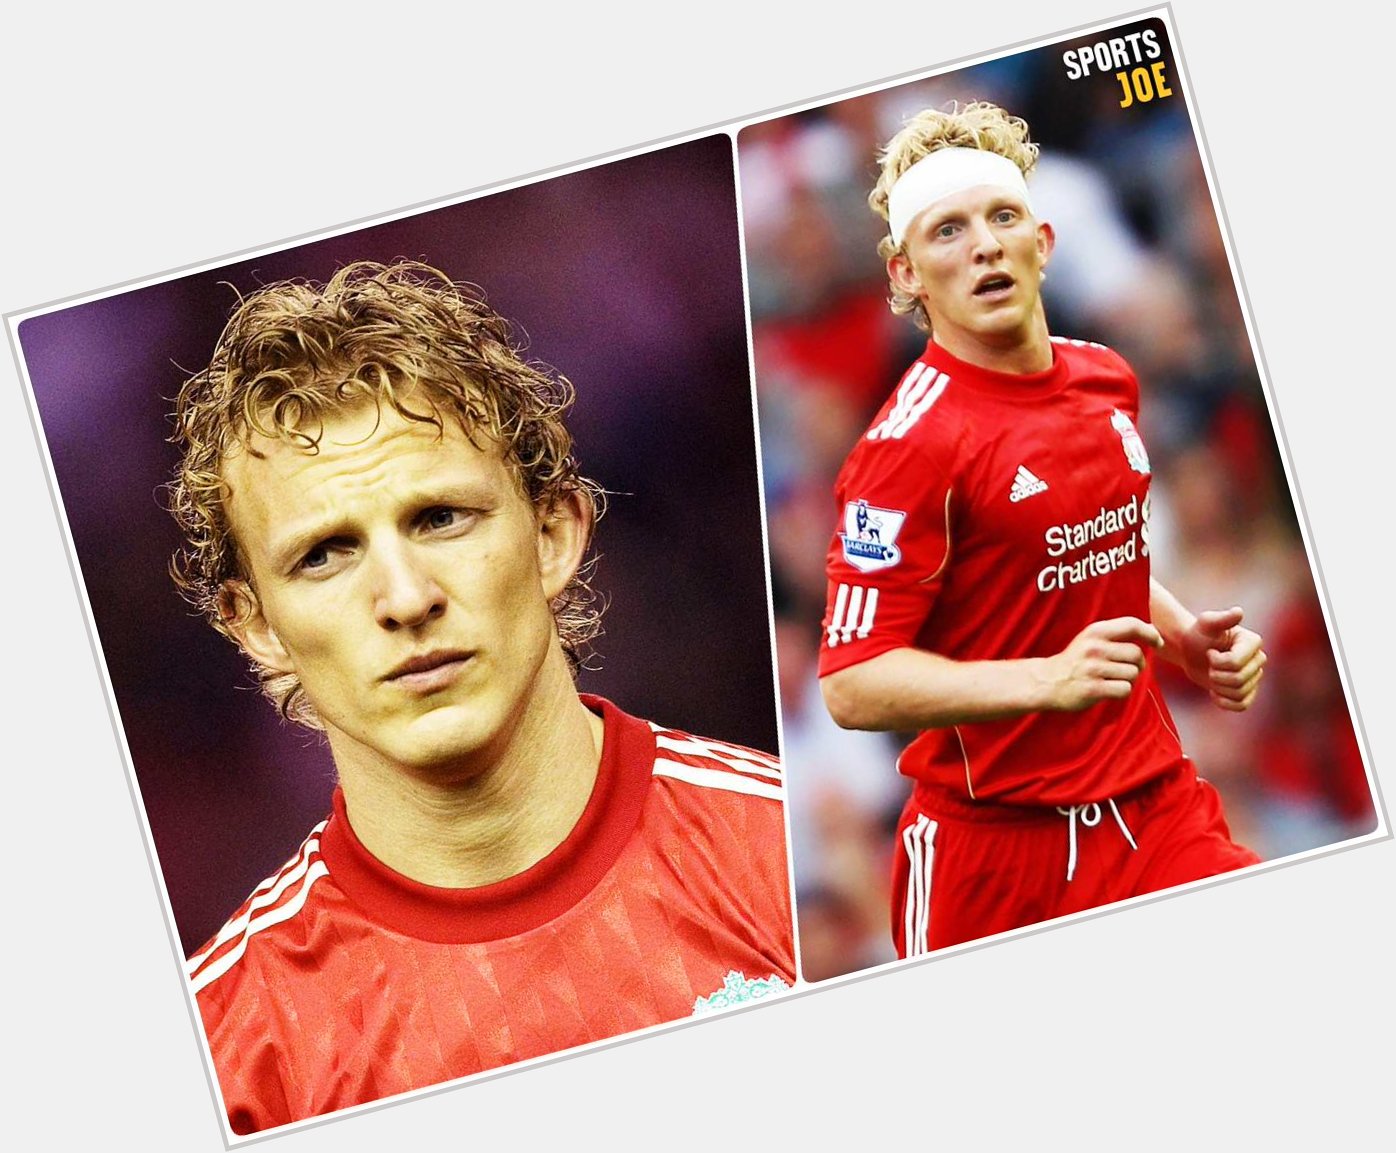 Happy 40th birthday to the man, the myth, the legend.

The one and only Dirk Kuyt  